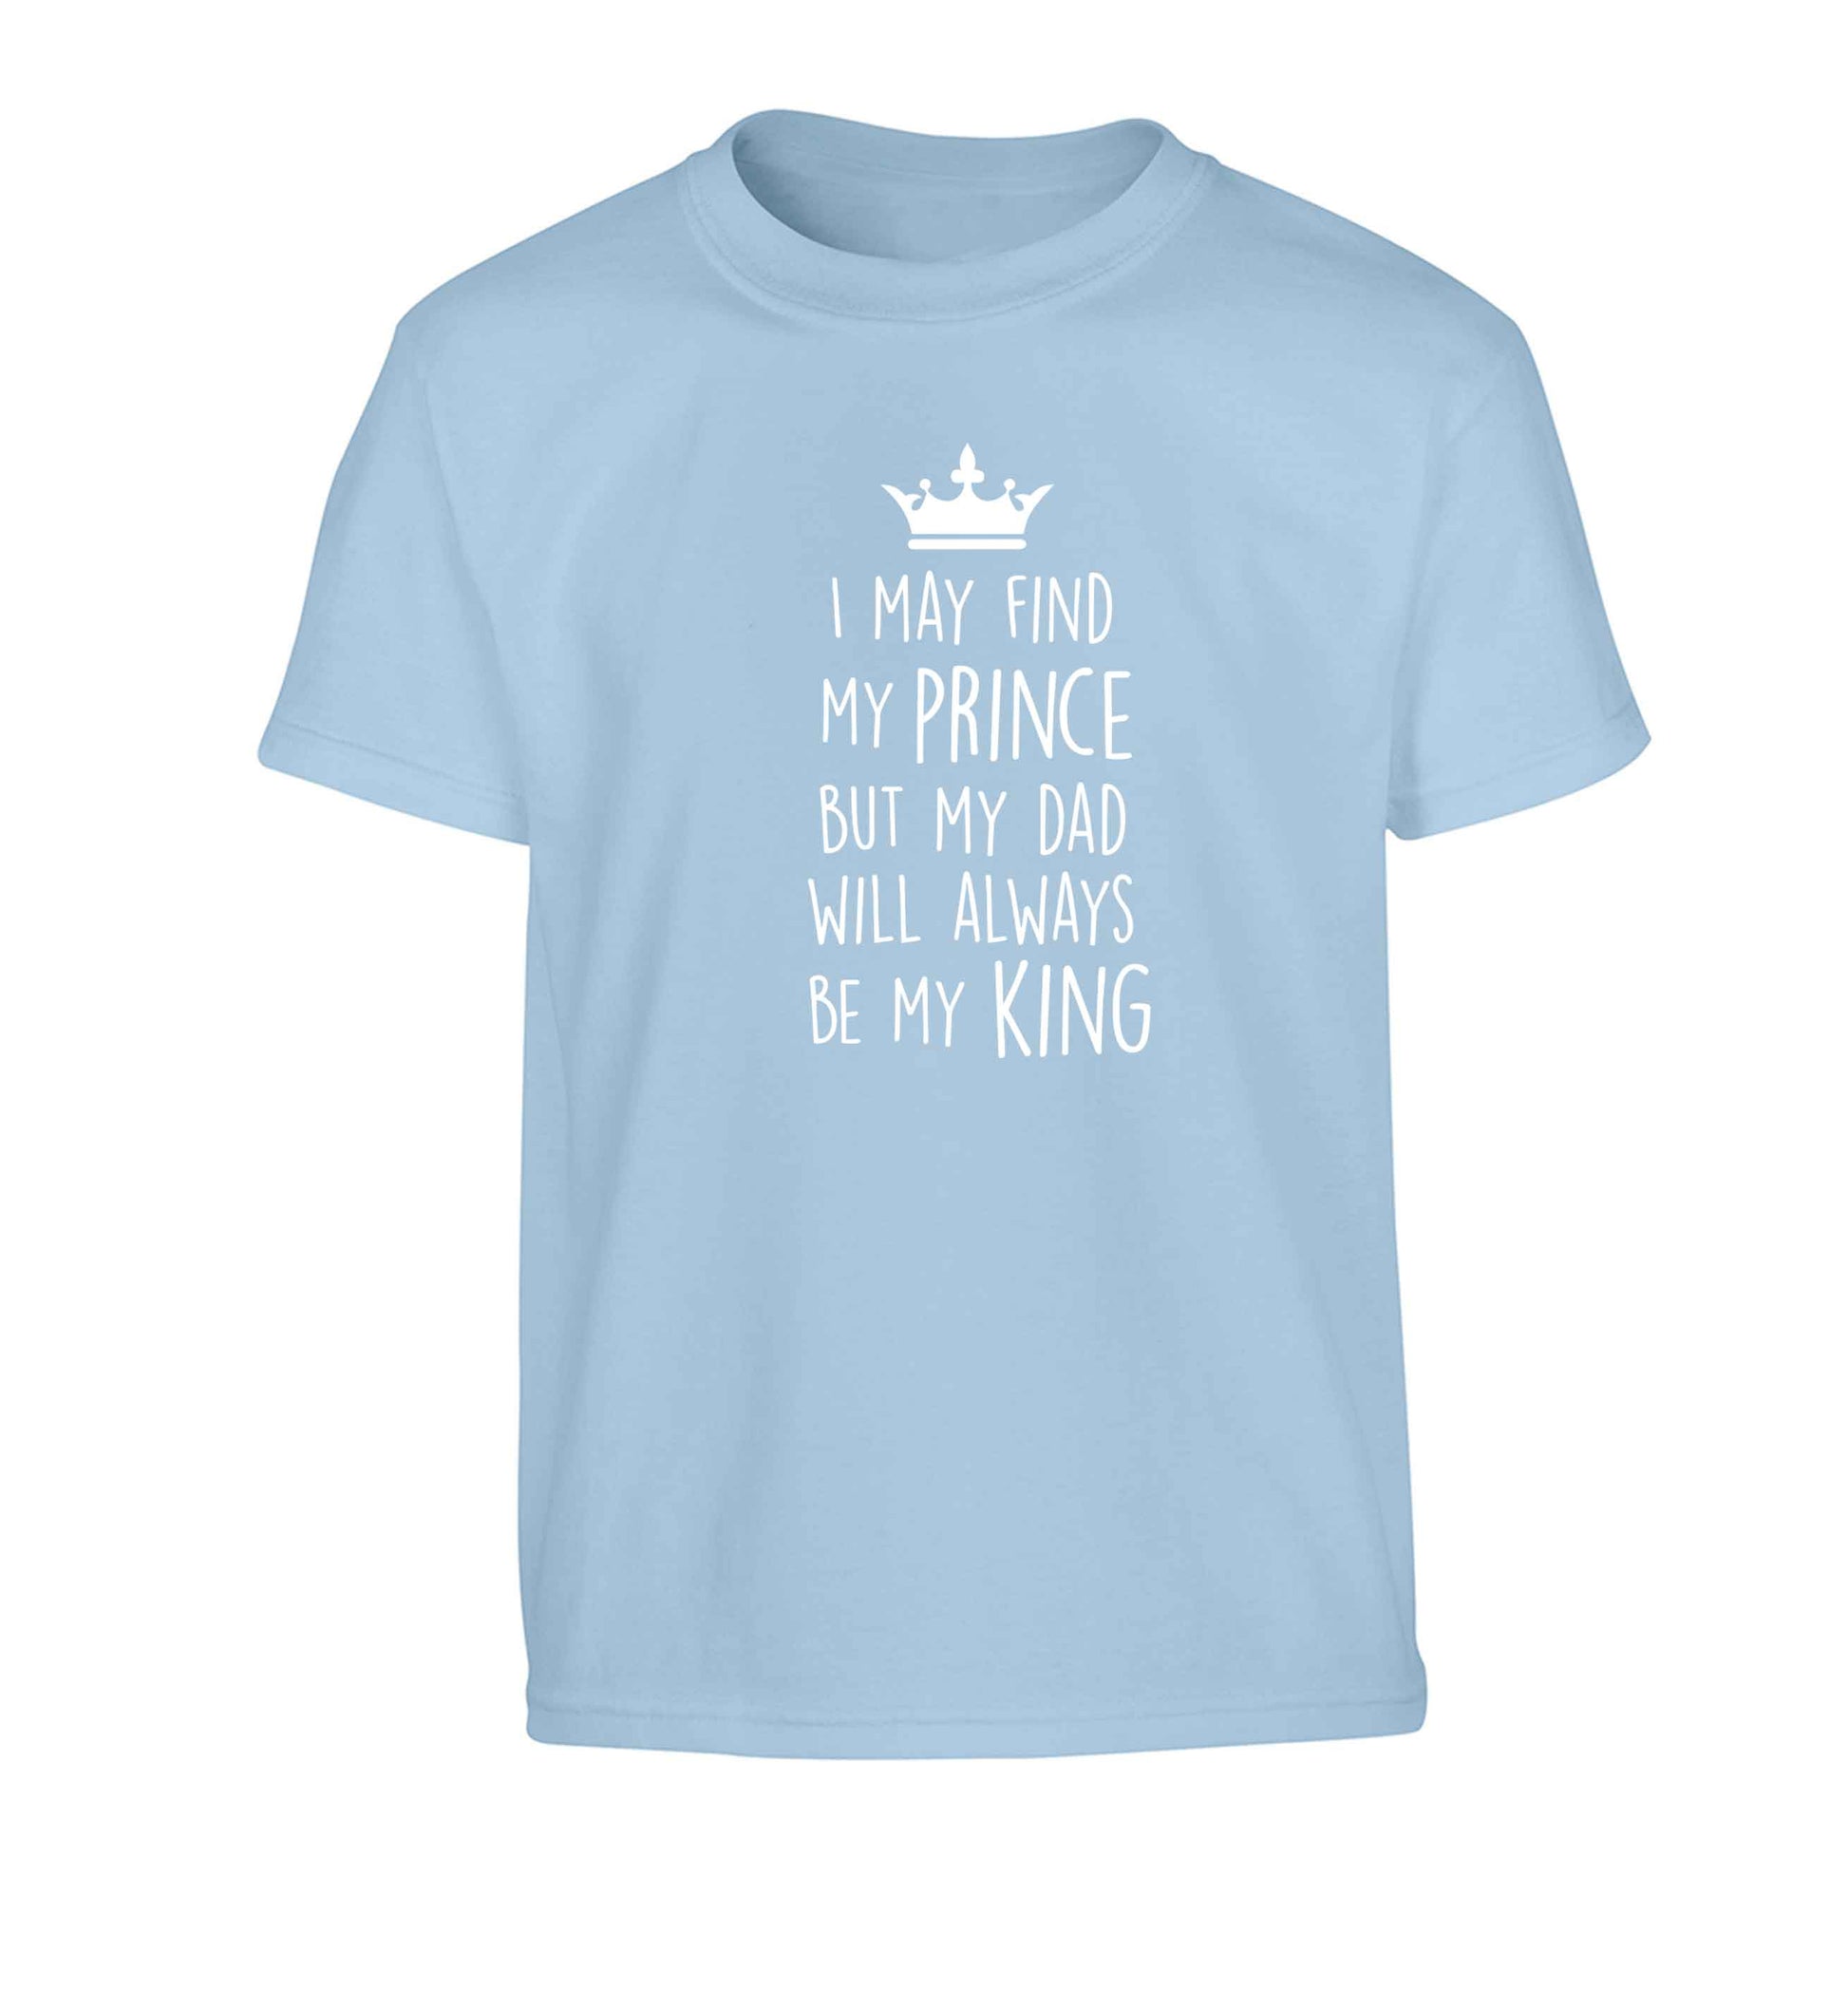 I may find my prince but my dad will always be my king Children's light blue Tshirt 12-13 Years